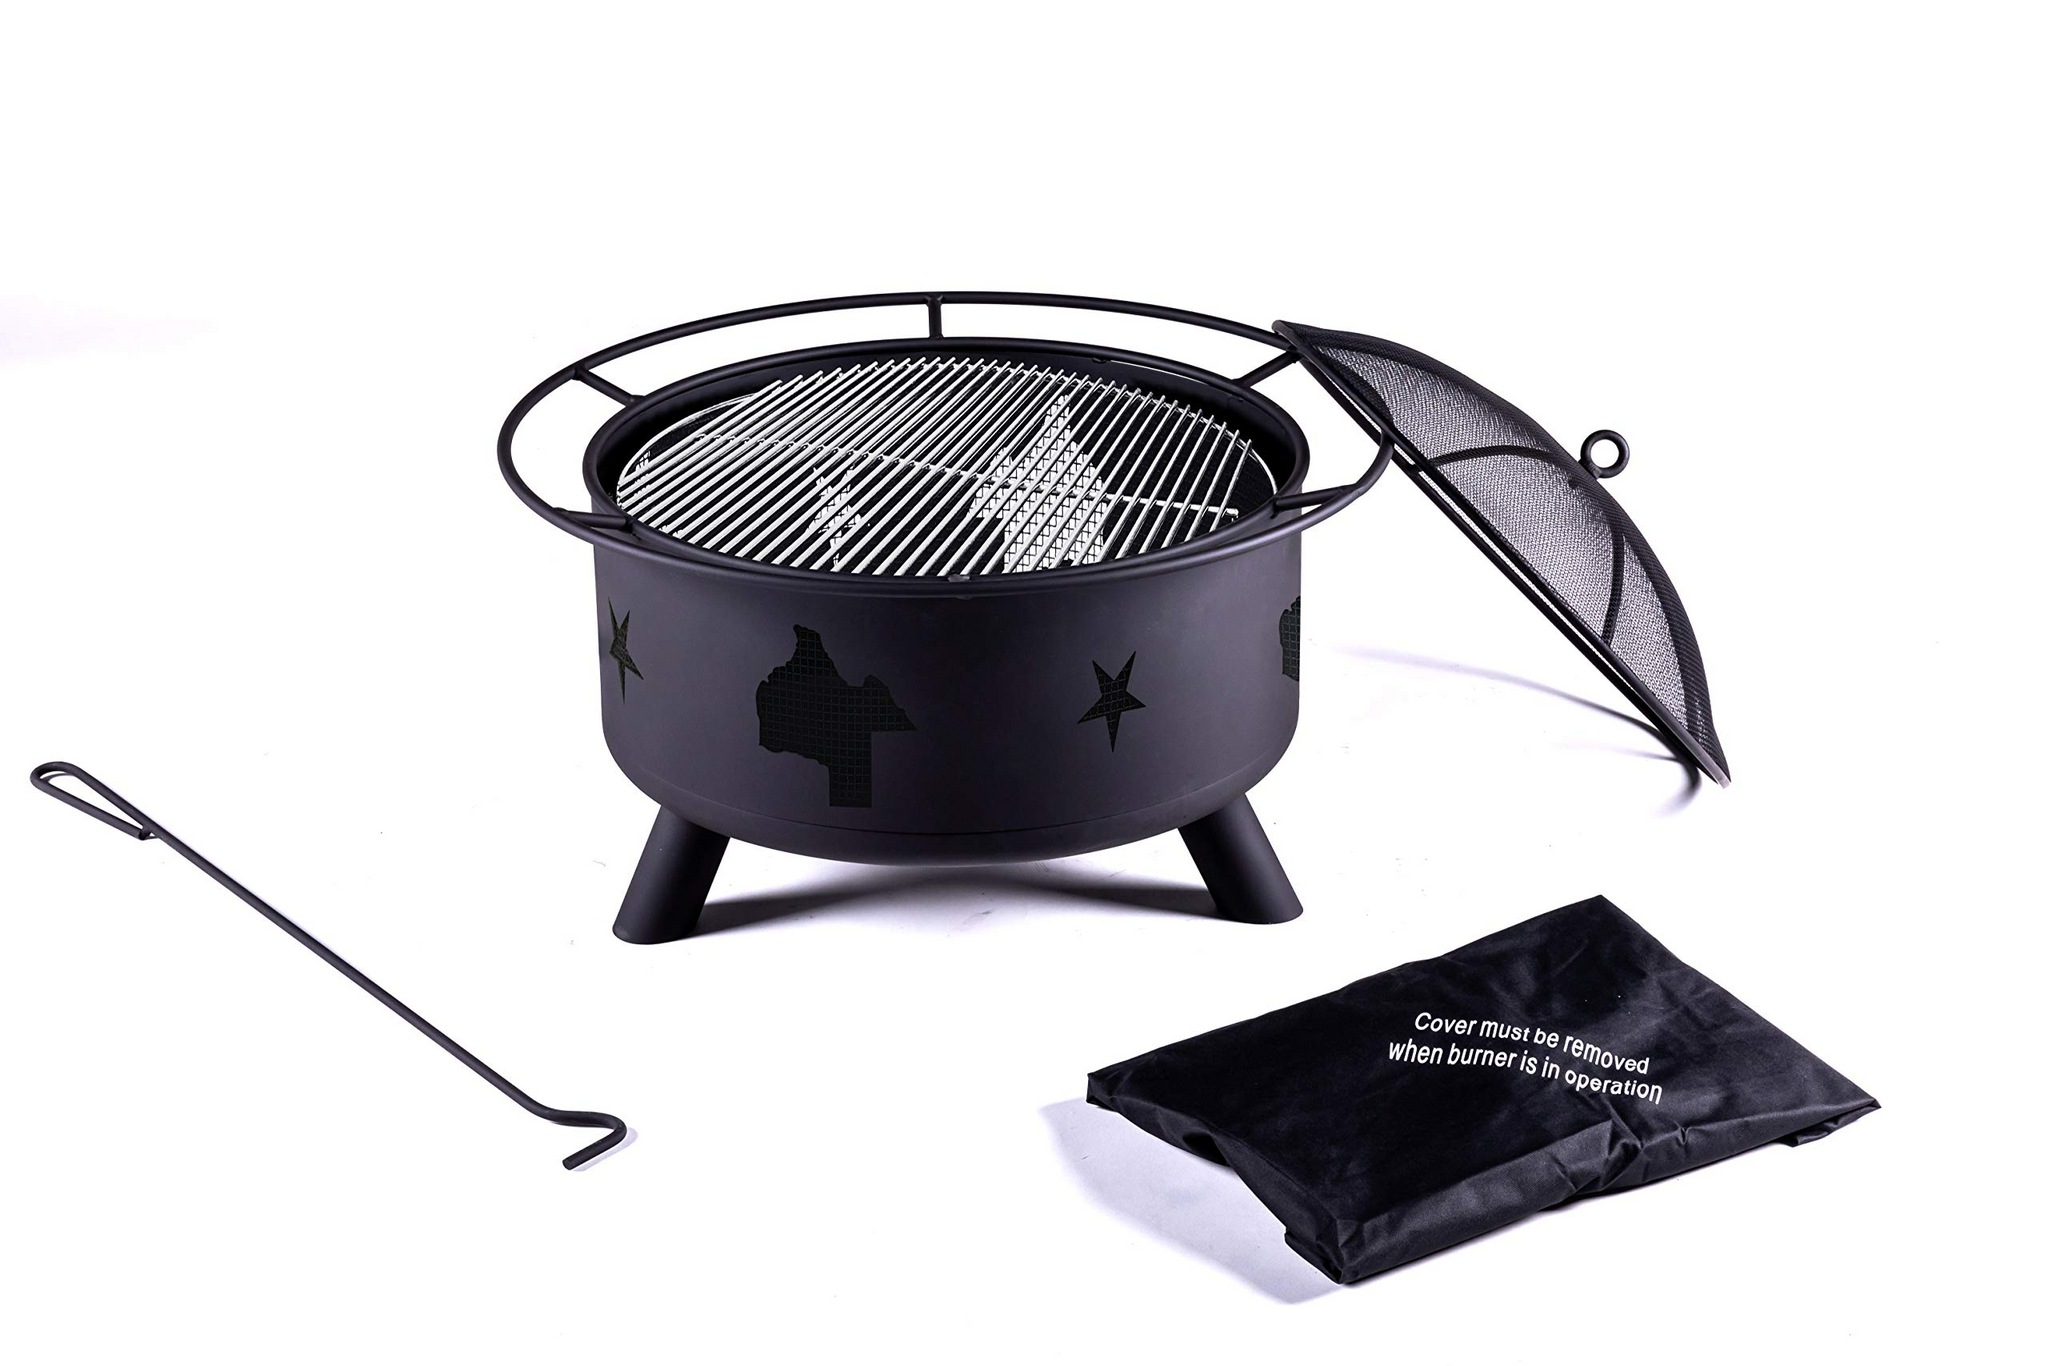 Outdoor Bonfire Burning Wood Grill - 30" Large Size Fire Pit with BBQ Grill, for Family Firepit Cooking Grill, fit Patio, Backyard, Camping, Ranch, Round Fire Pit Cover, Black